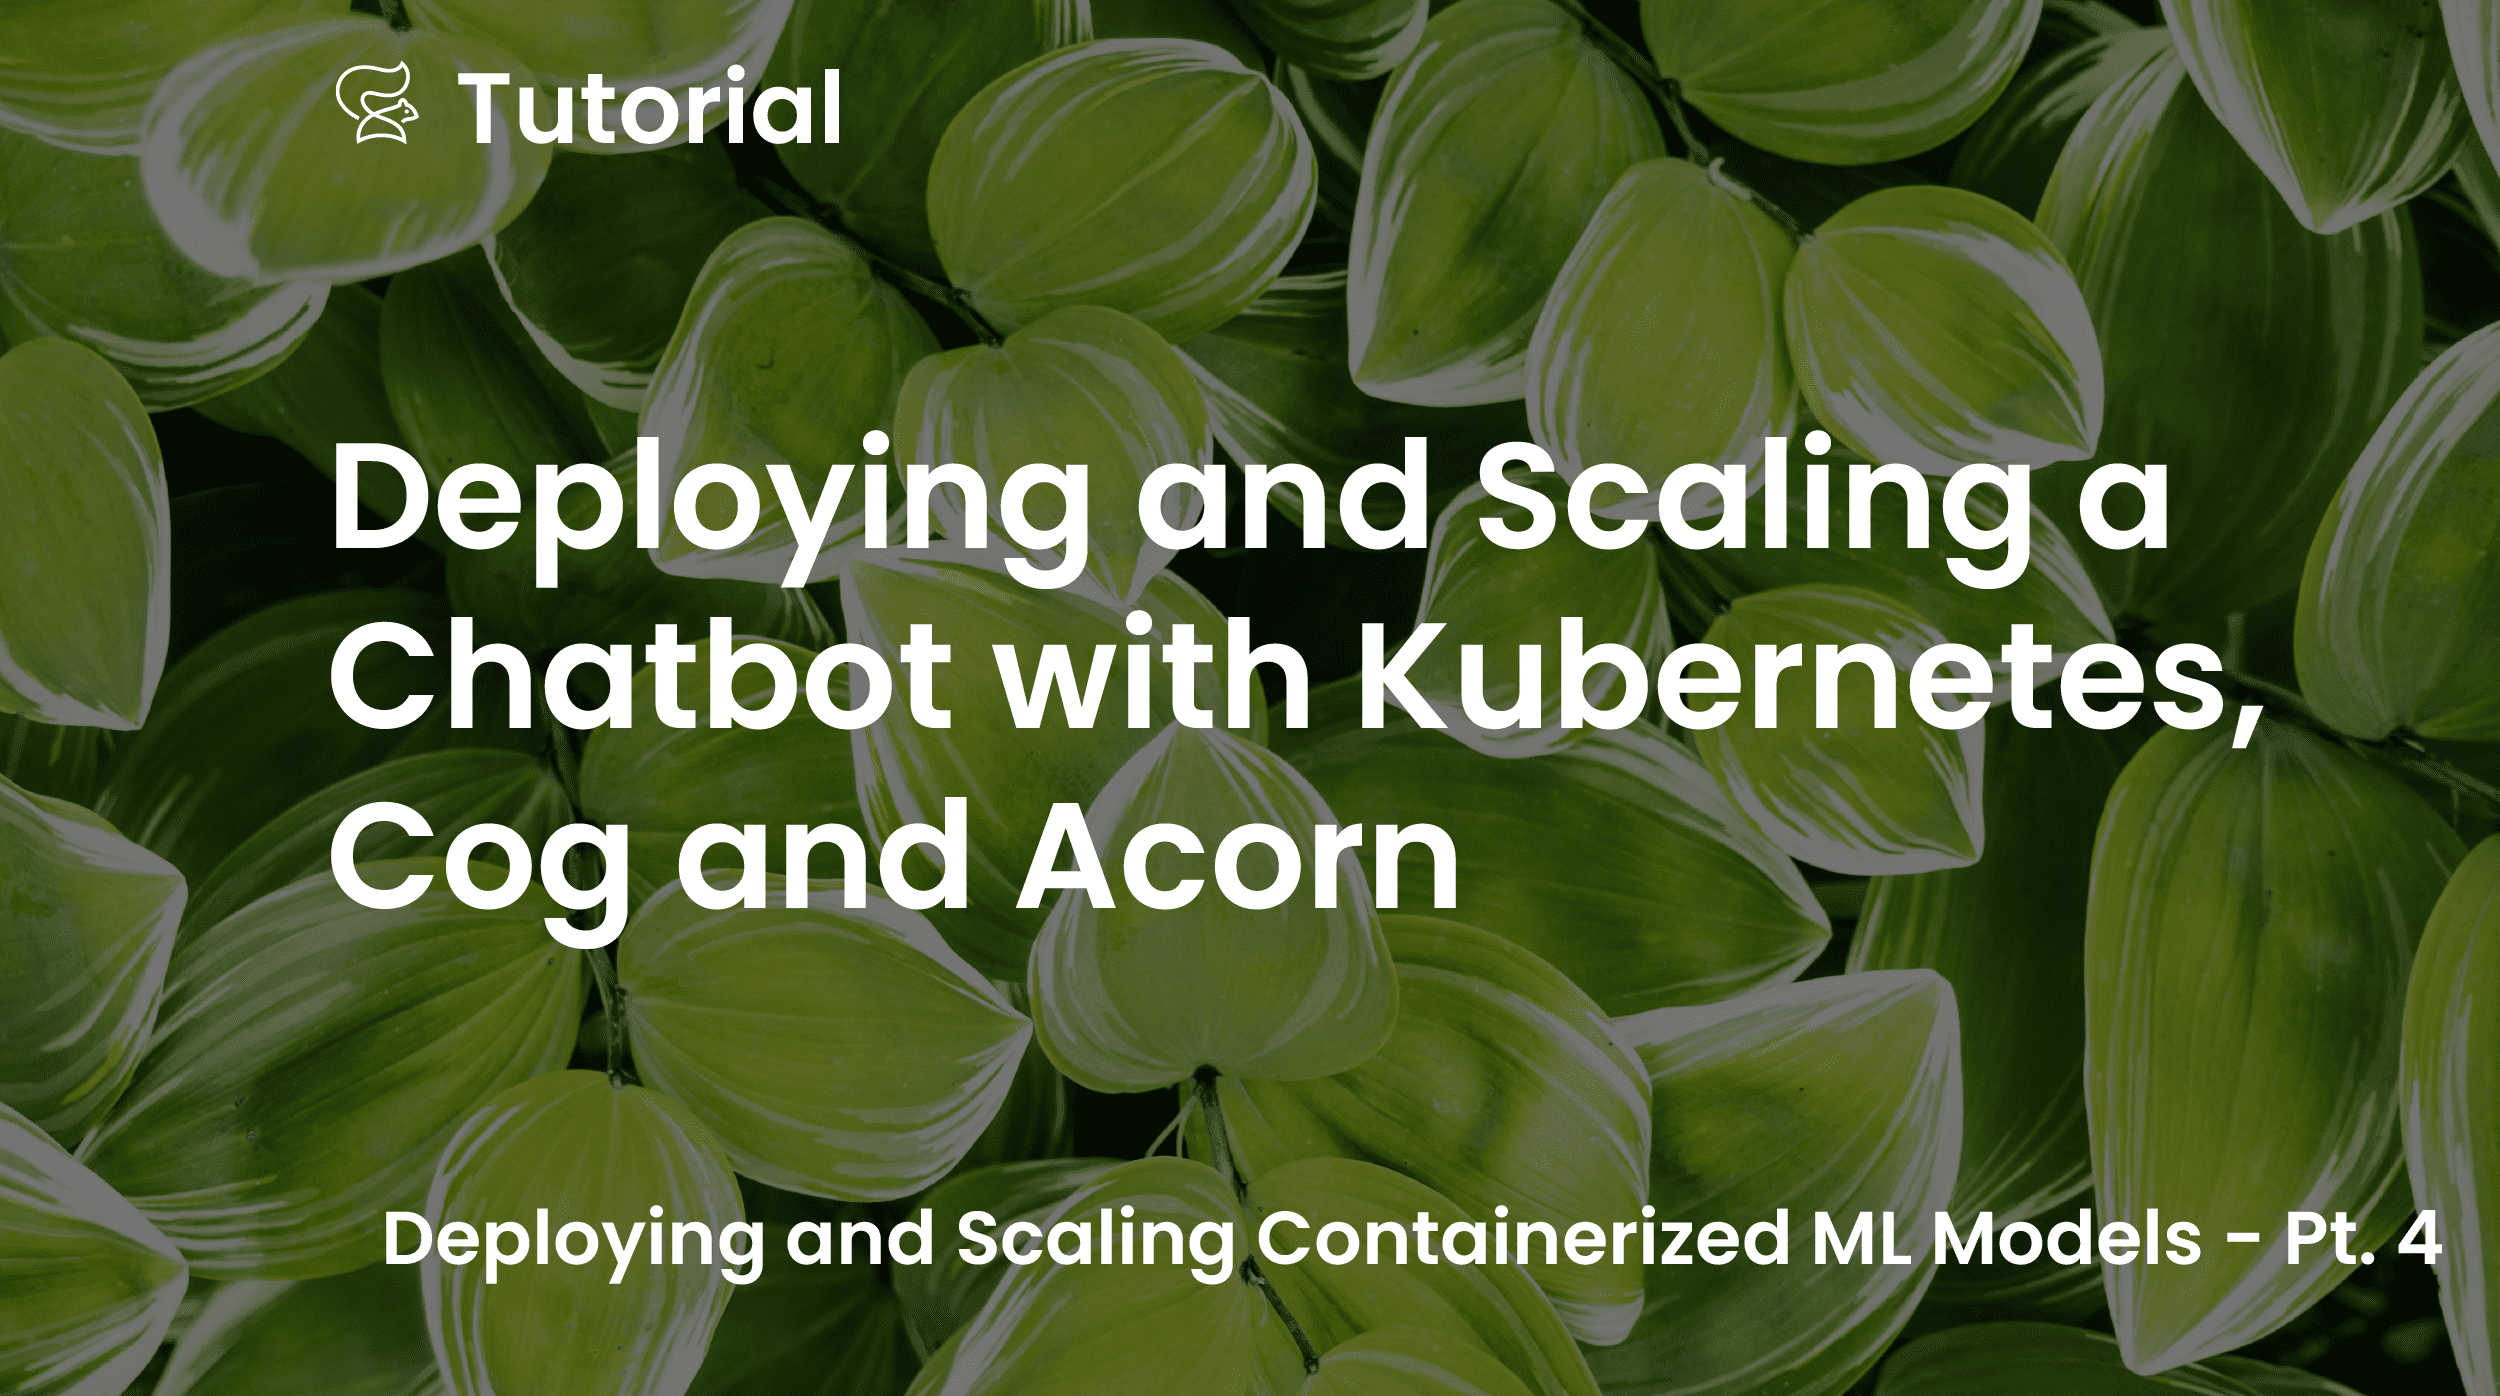 Deploying and Scaling a PyTorch Chatbot Model with Kubernetes, Cog and Acorn